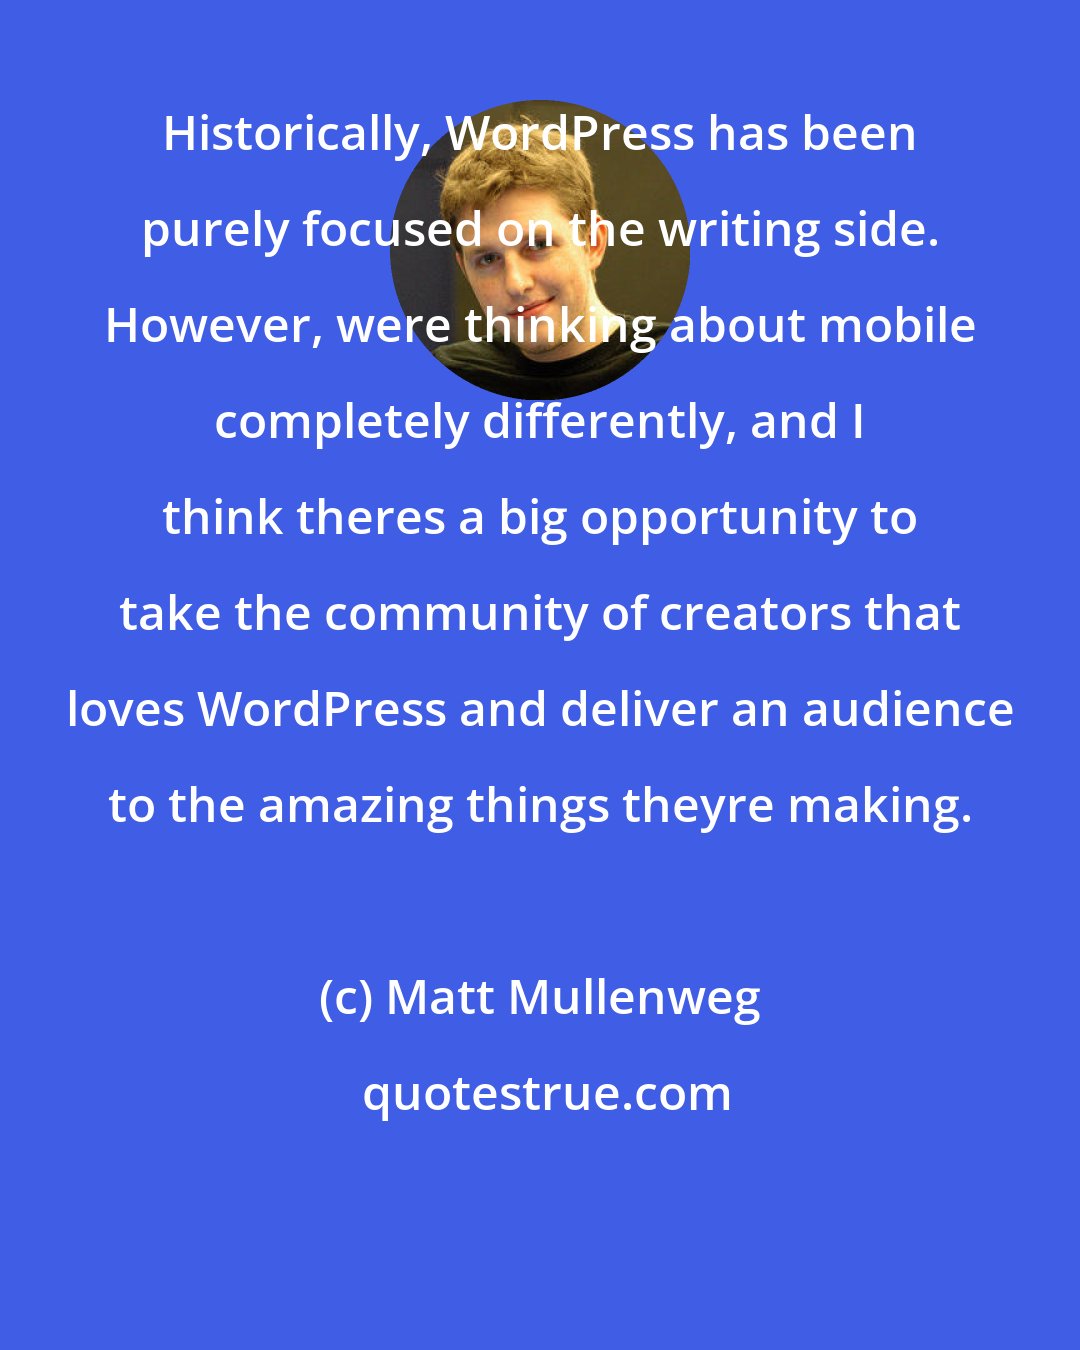 Matt Mullenweg: Historically, WordPress has been purely focused on the writing side. However, were thinking about mobile completely differently, and I think theres a big opportunity to take the community of creators that loves WordPress and deliver an audience to the amazing things theyre making.